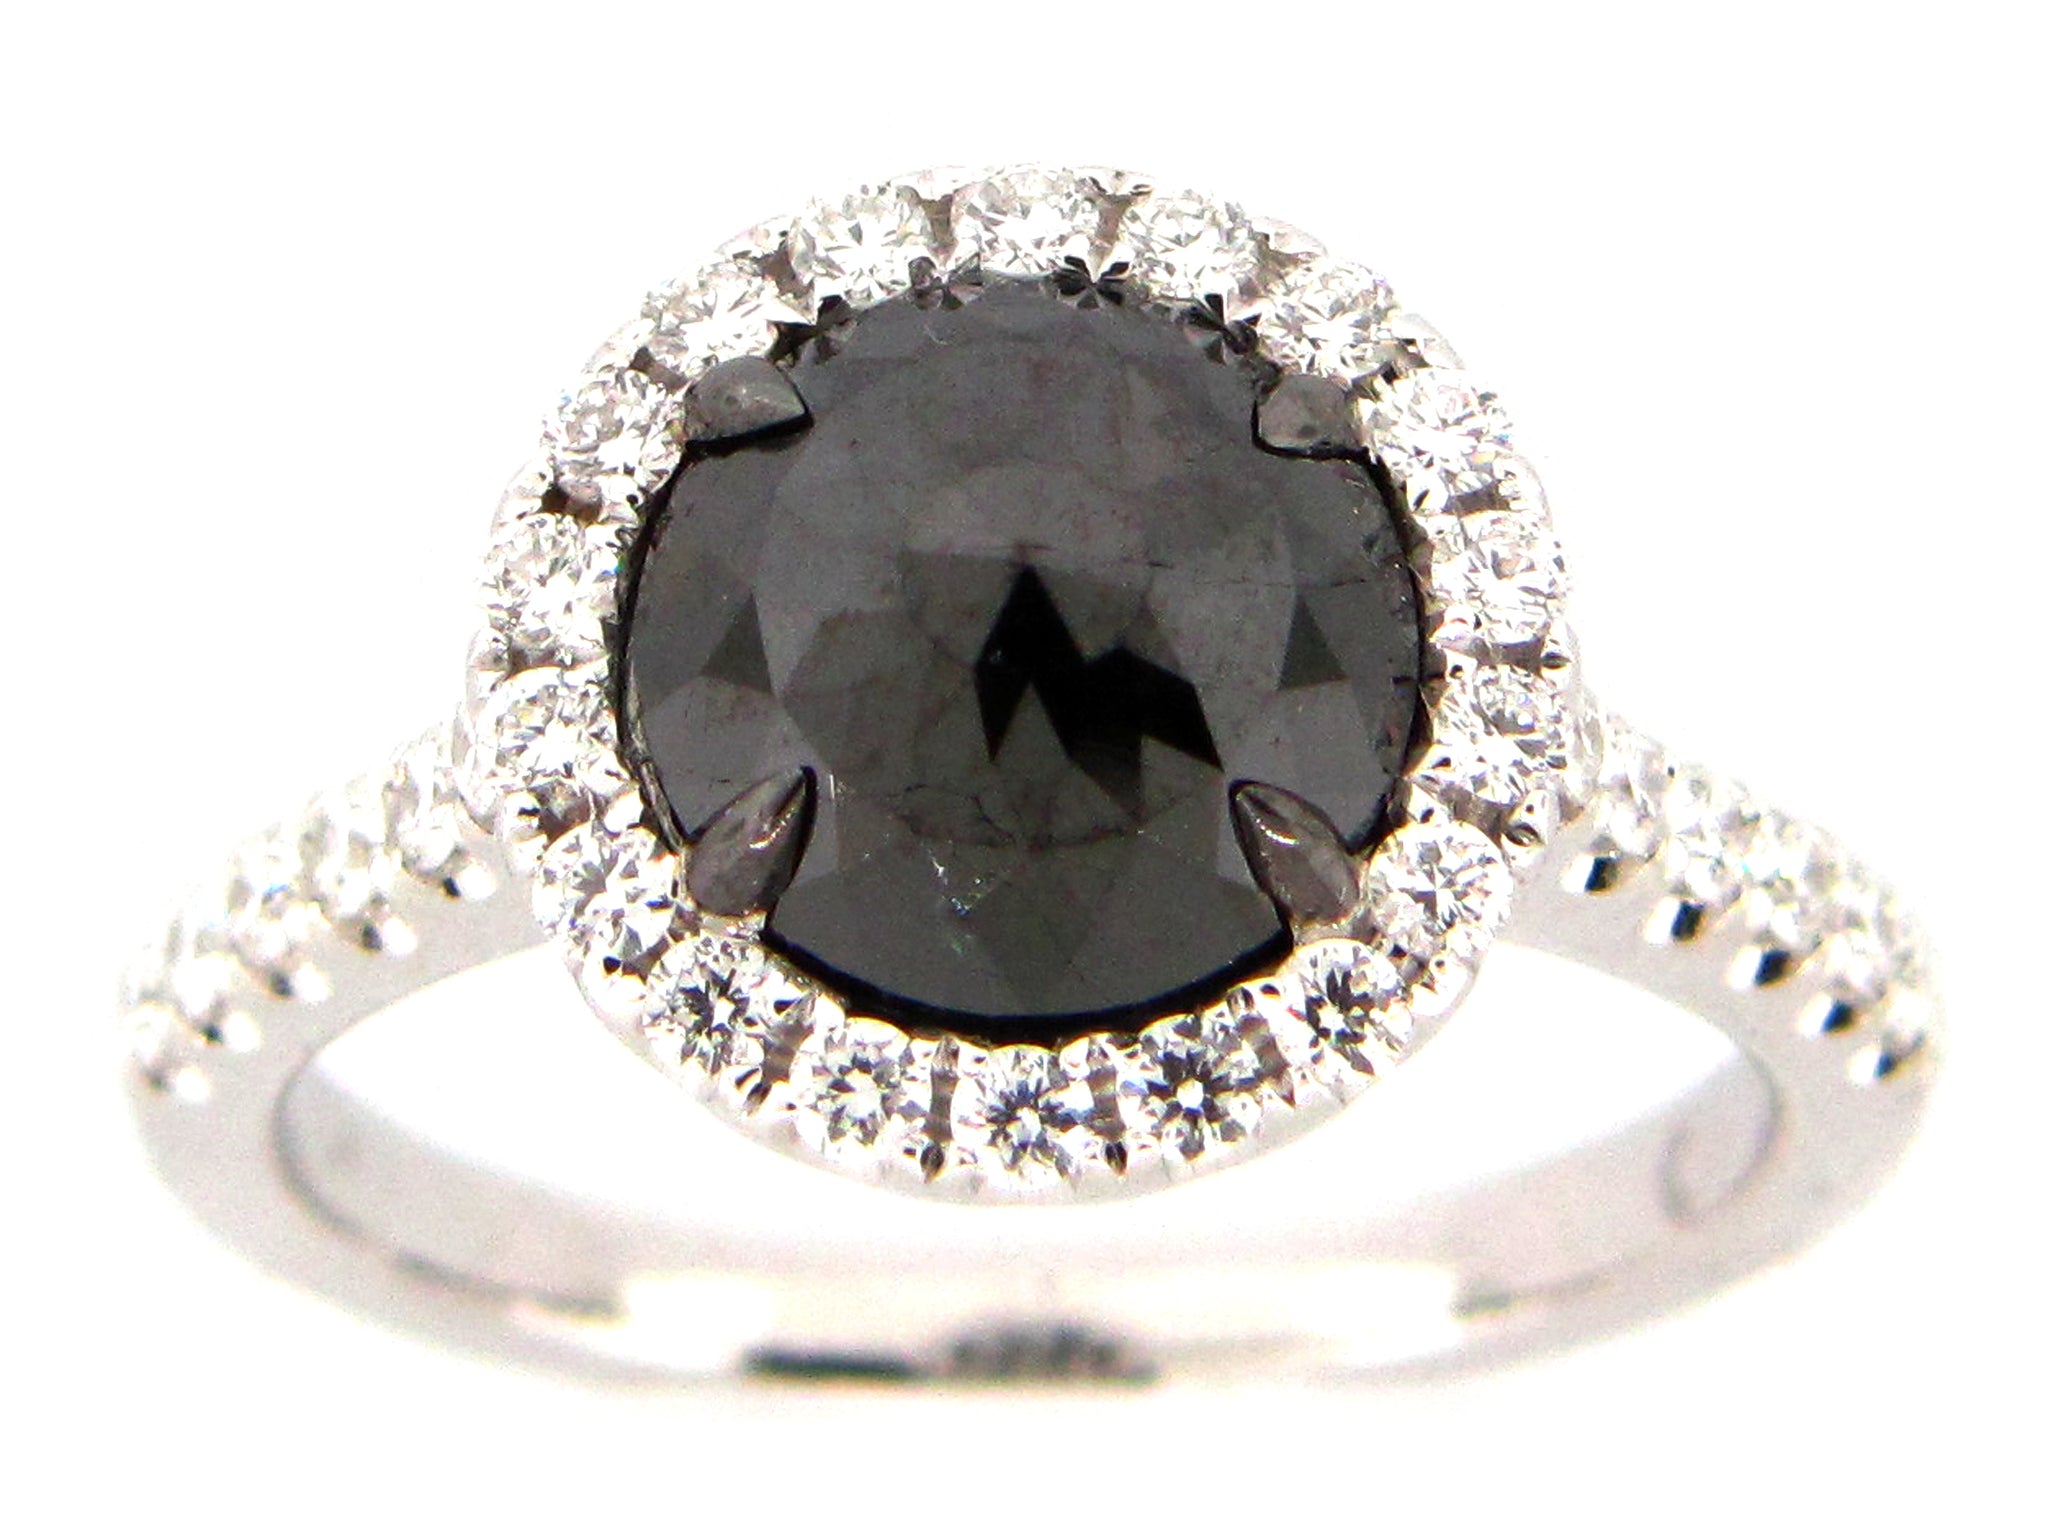 A ring featuring a large black diamond round stone surrounded by smaller diamonds